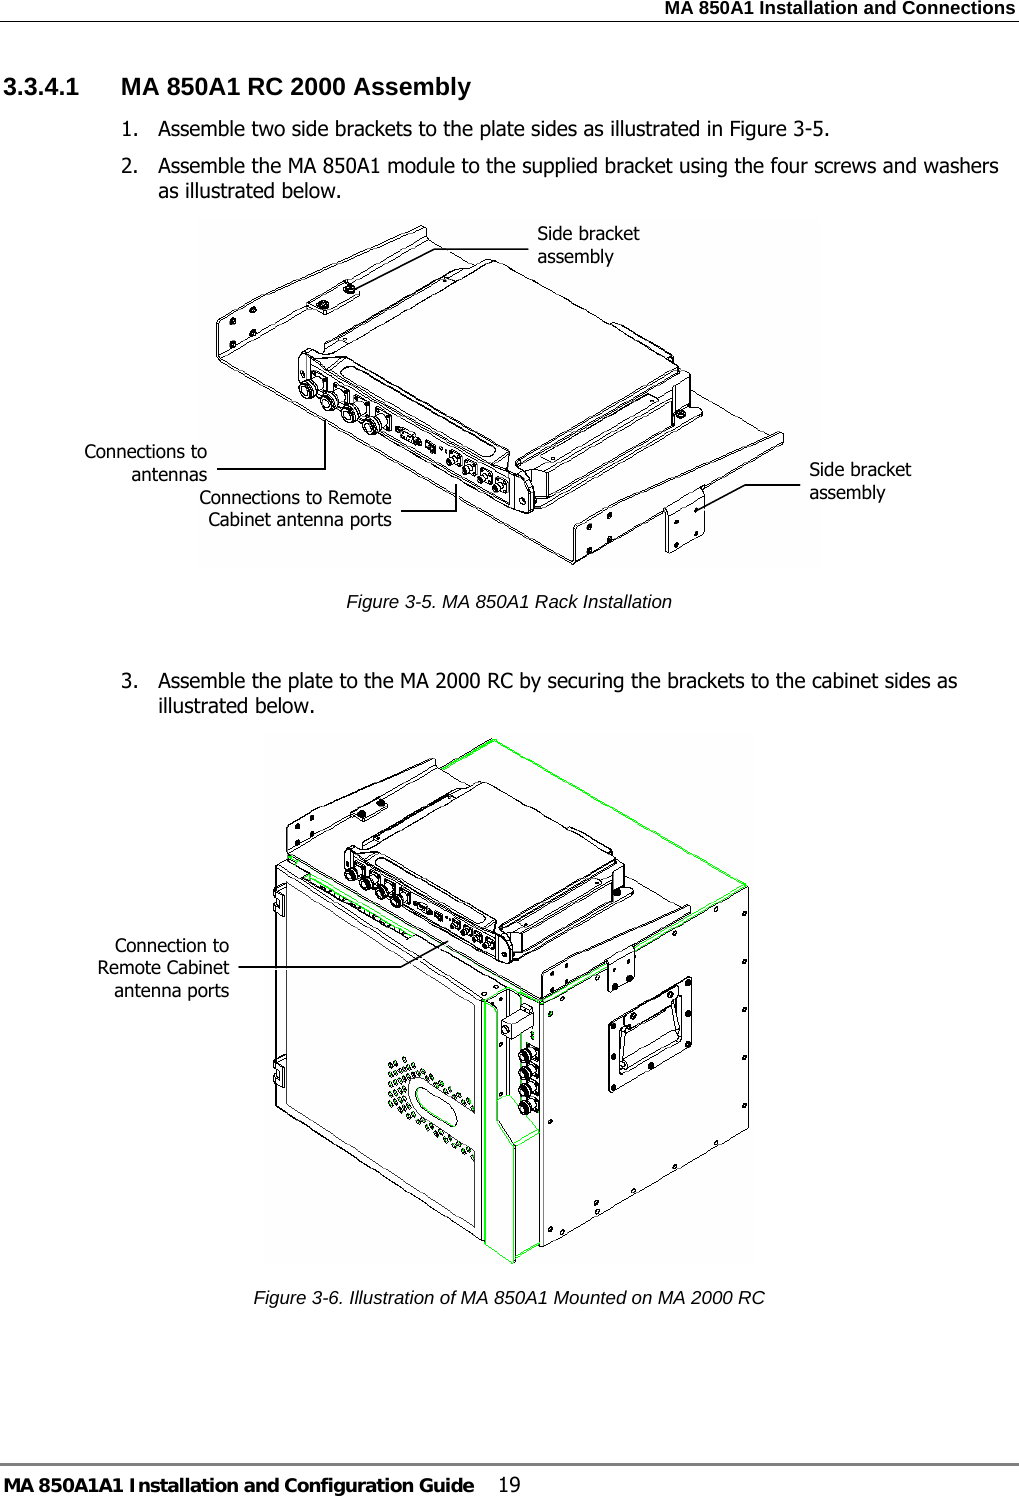 MA 850A1 Installation and Connections MA 850A1A1 Installation and Configuration Guide  19 3.3.4.1  MA 850A1 RC 2000 Assembly 1. Assemble two side brackets to the plate sides as illustrated in Figure  3-5.  2. Assemble the MA 850A1 module to the supplied bracket using the four screws and washers as illustrated below.   Figure  3-5. MA 850A1 Rack Installation  3. Assemble the plate to the MA 2000 RC by securing the brackets to the cabinet sides as illustrated below.   Figure  3-6. Illustration of MA 850A1 Mounted on MA 2000 RC  Side bracket assembly Connections to Remote Cabinet antenna portsConnections to antennas  Side bracket assembly Connection to Remote Cabinet antenna ports 